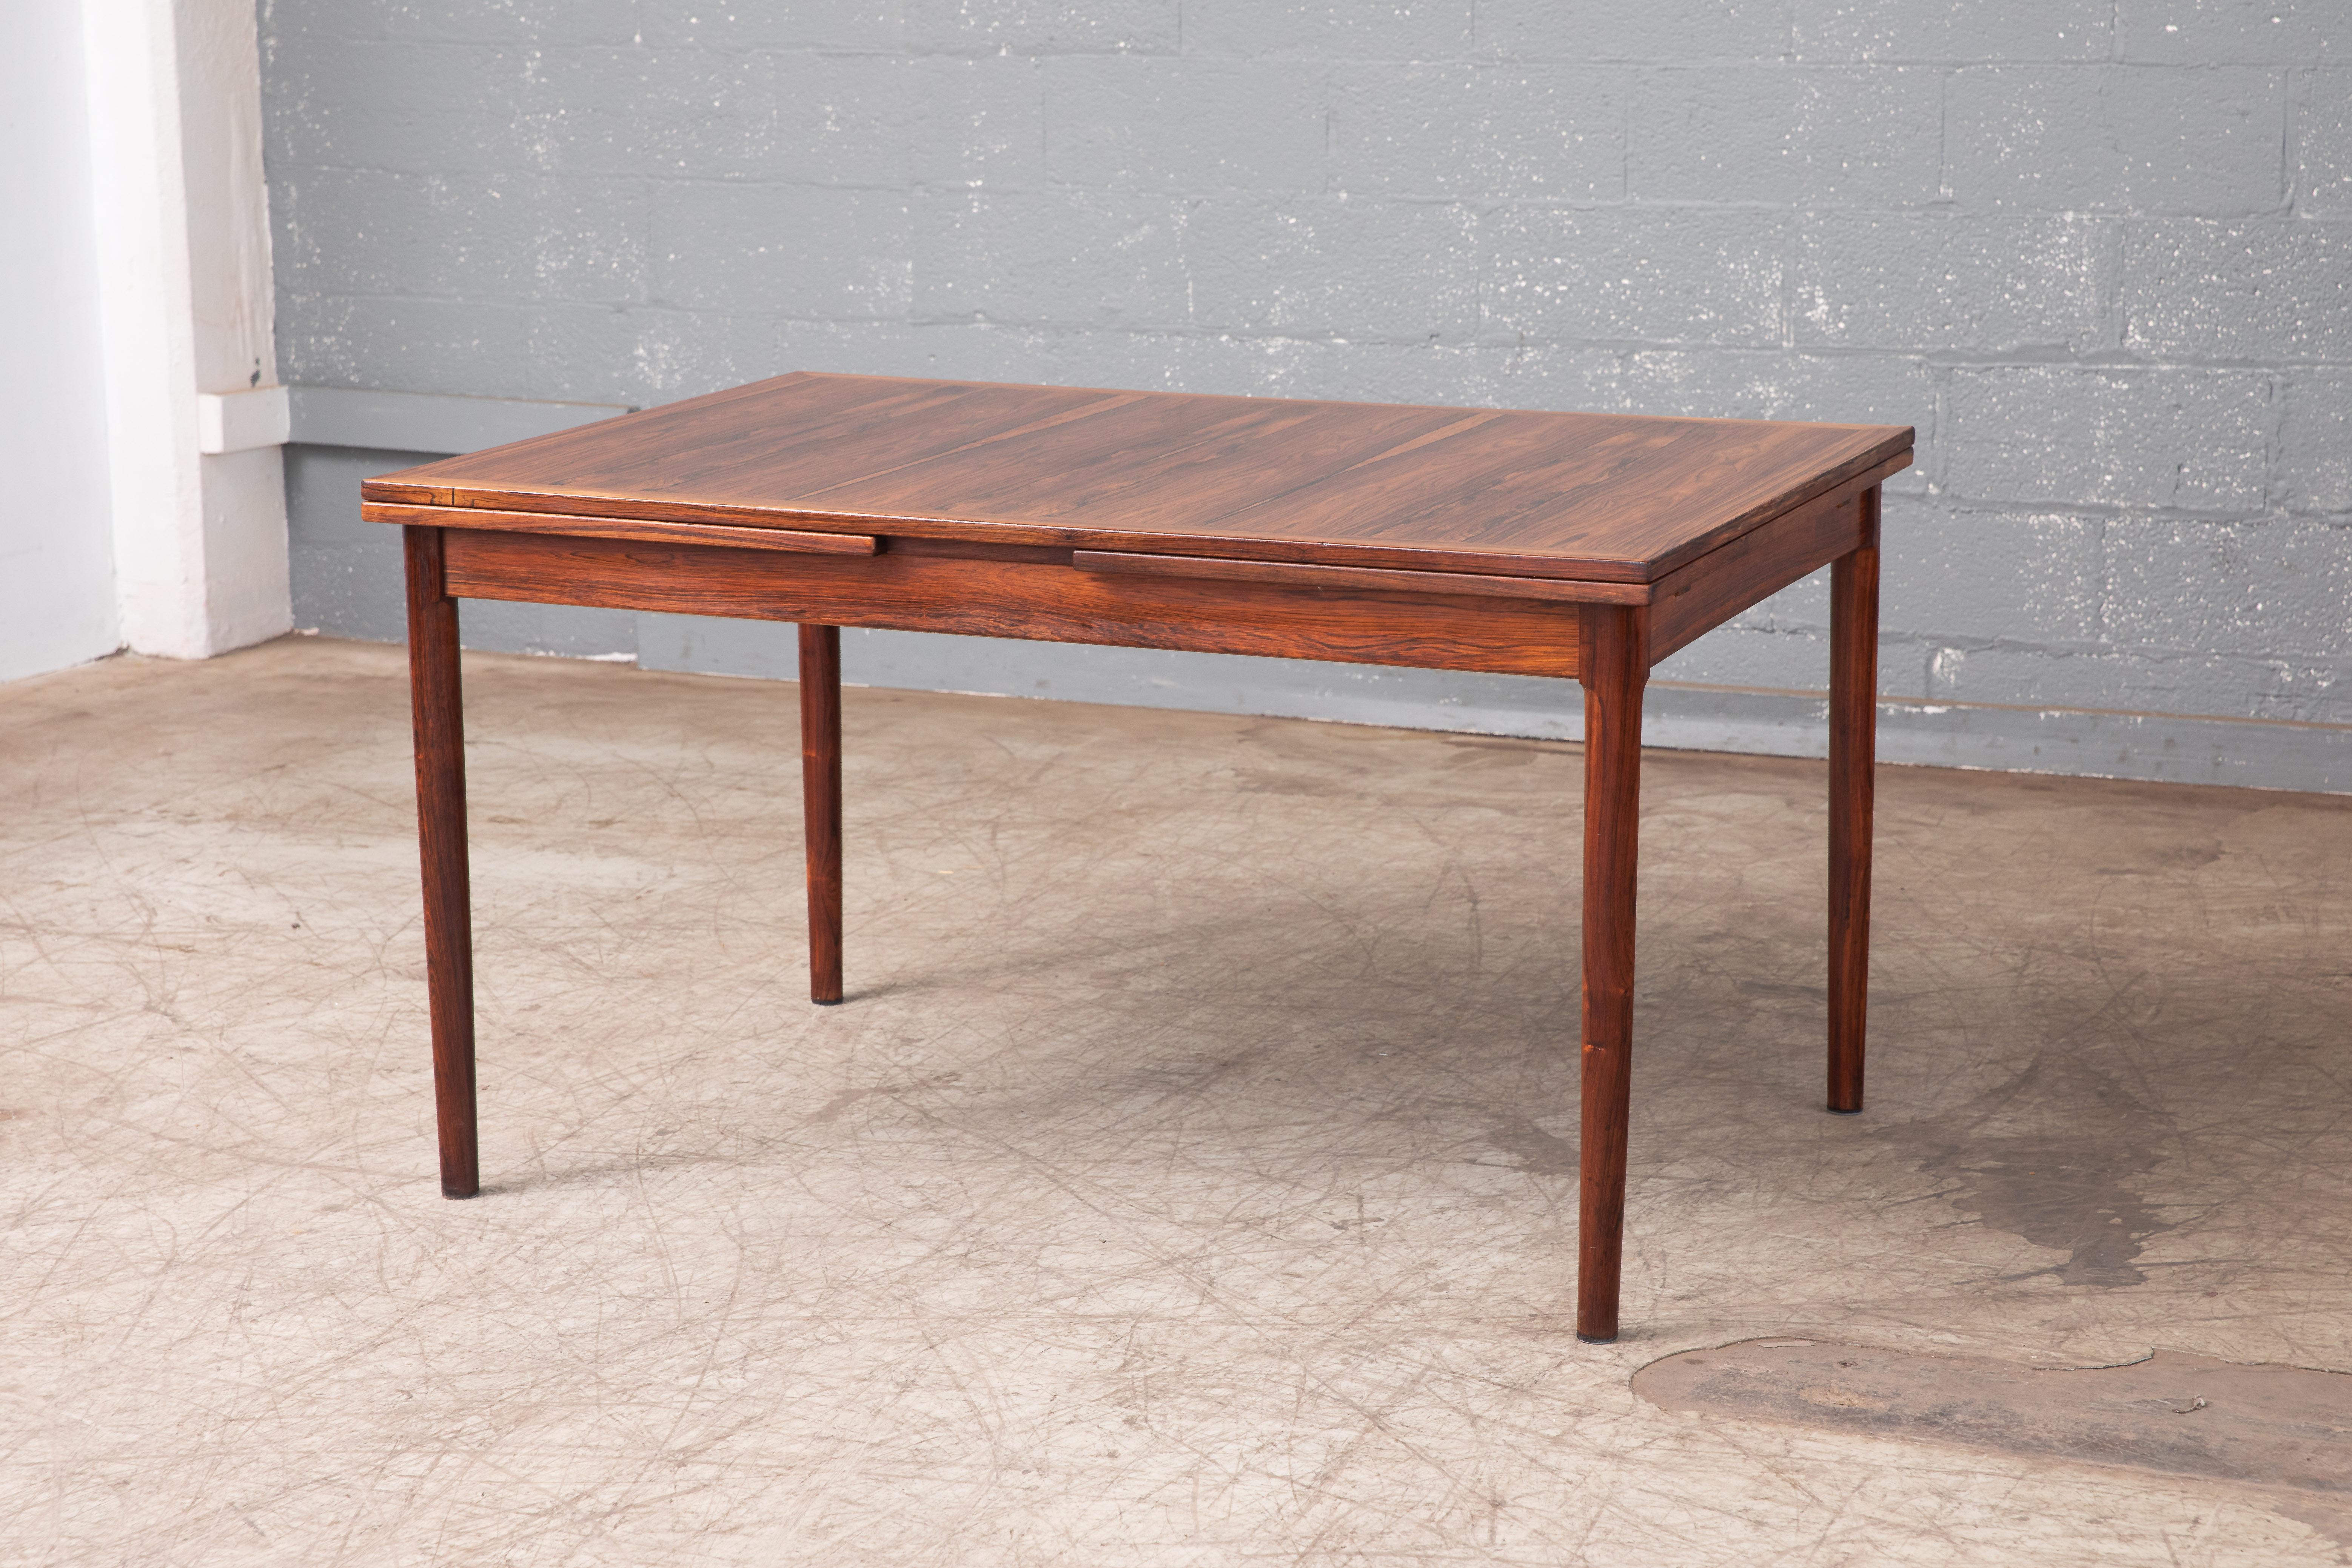 Scandinavian Modern Danish Midcentury Danish Rosewood Dining Table with Extensions, 1960s